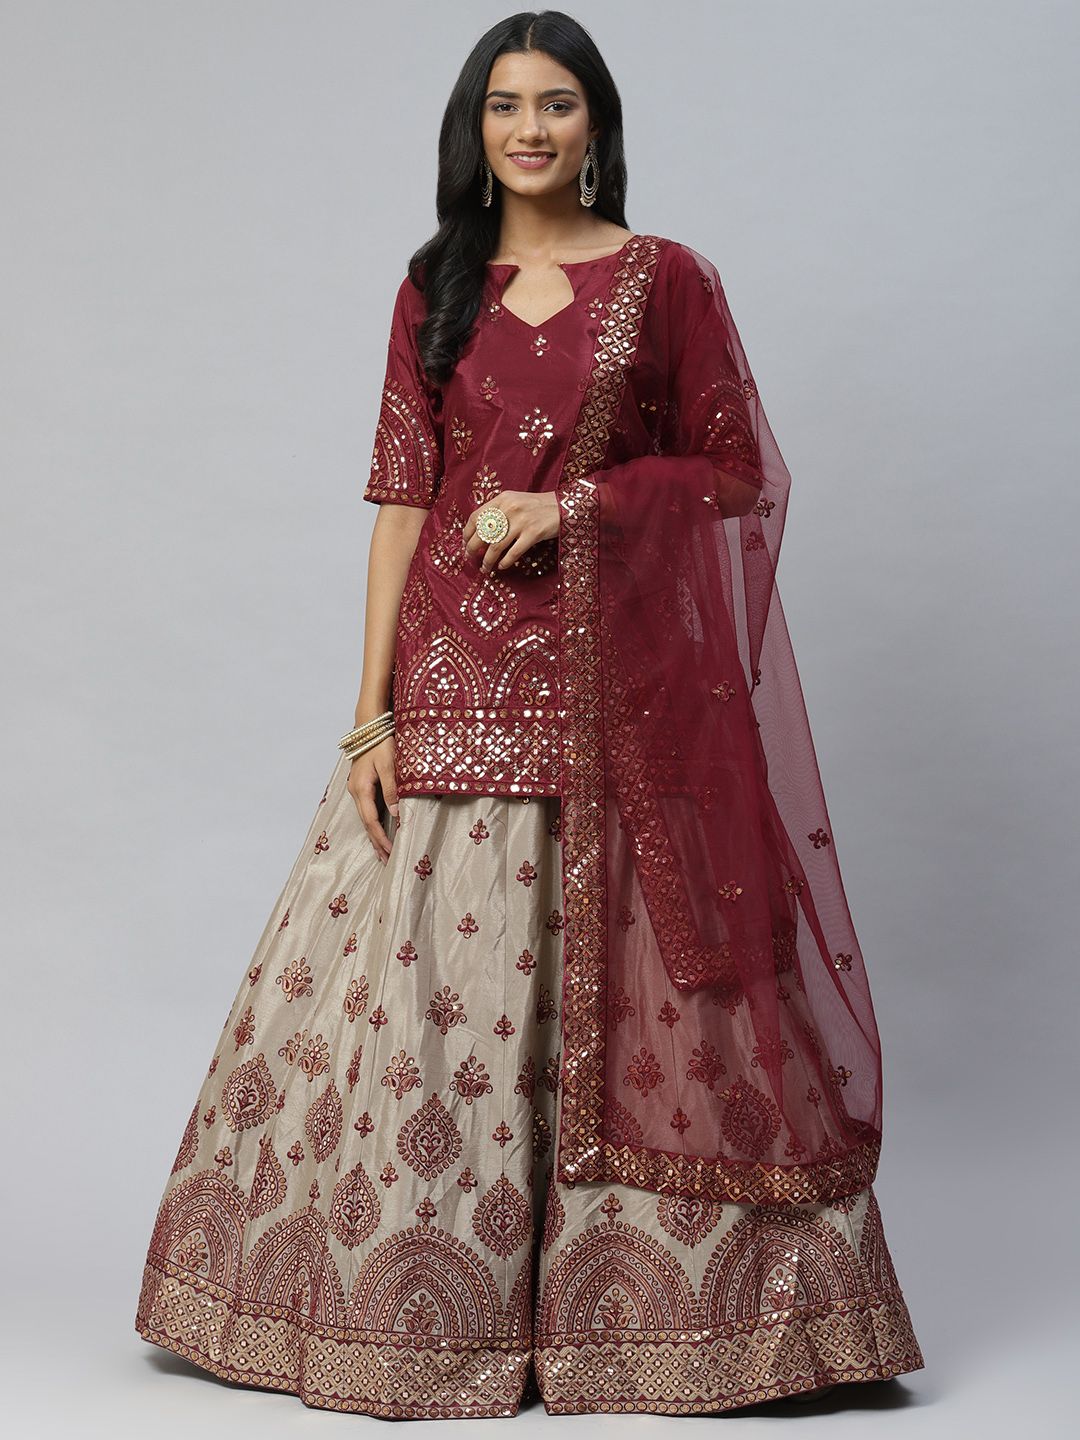 SHUBHKALA Beige & Maroon Embroidered Thread Work Semi-Stitched Lehenga & Unstitched Blouse With Dupatta Price in India